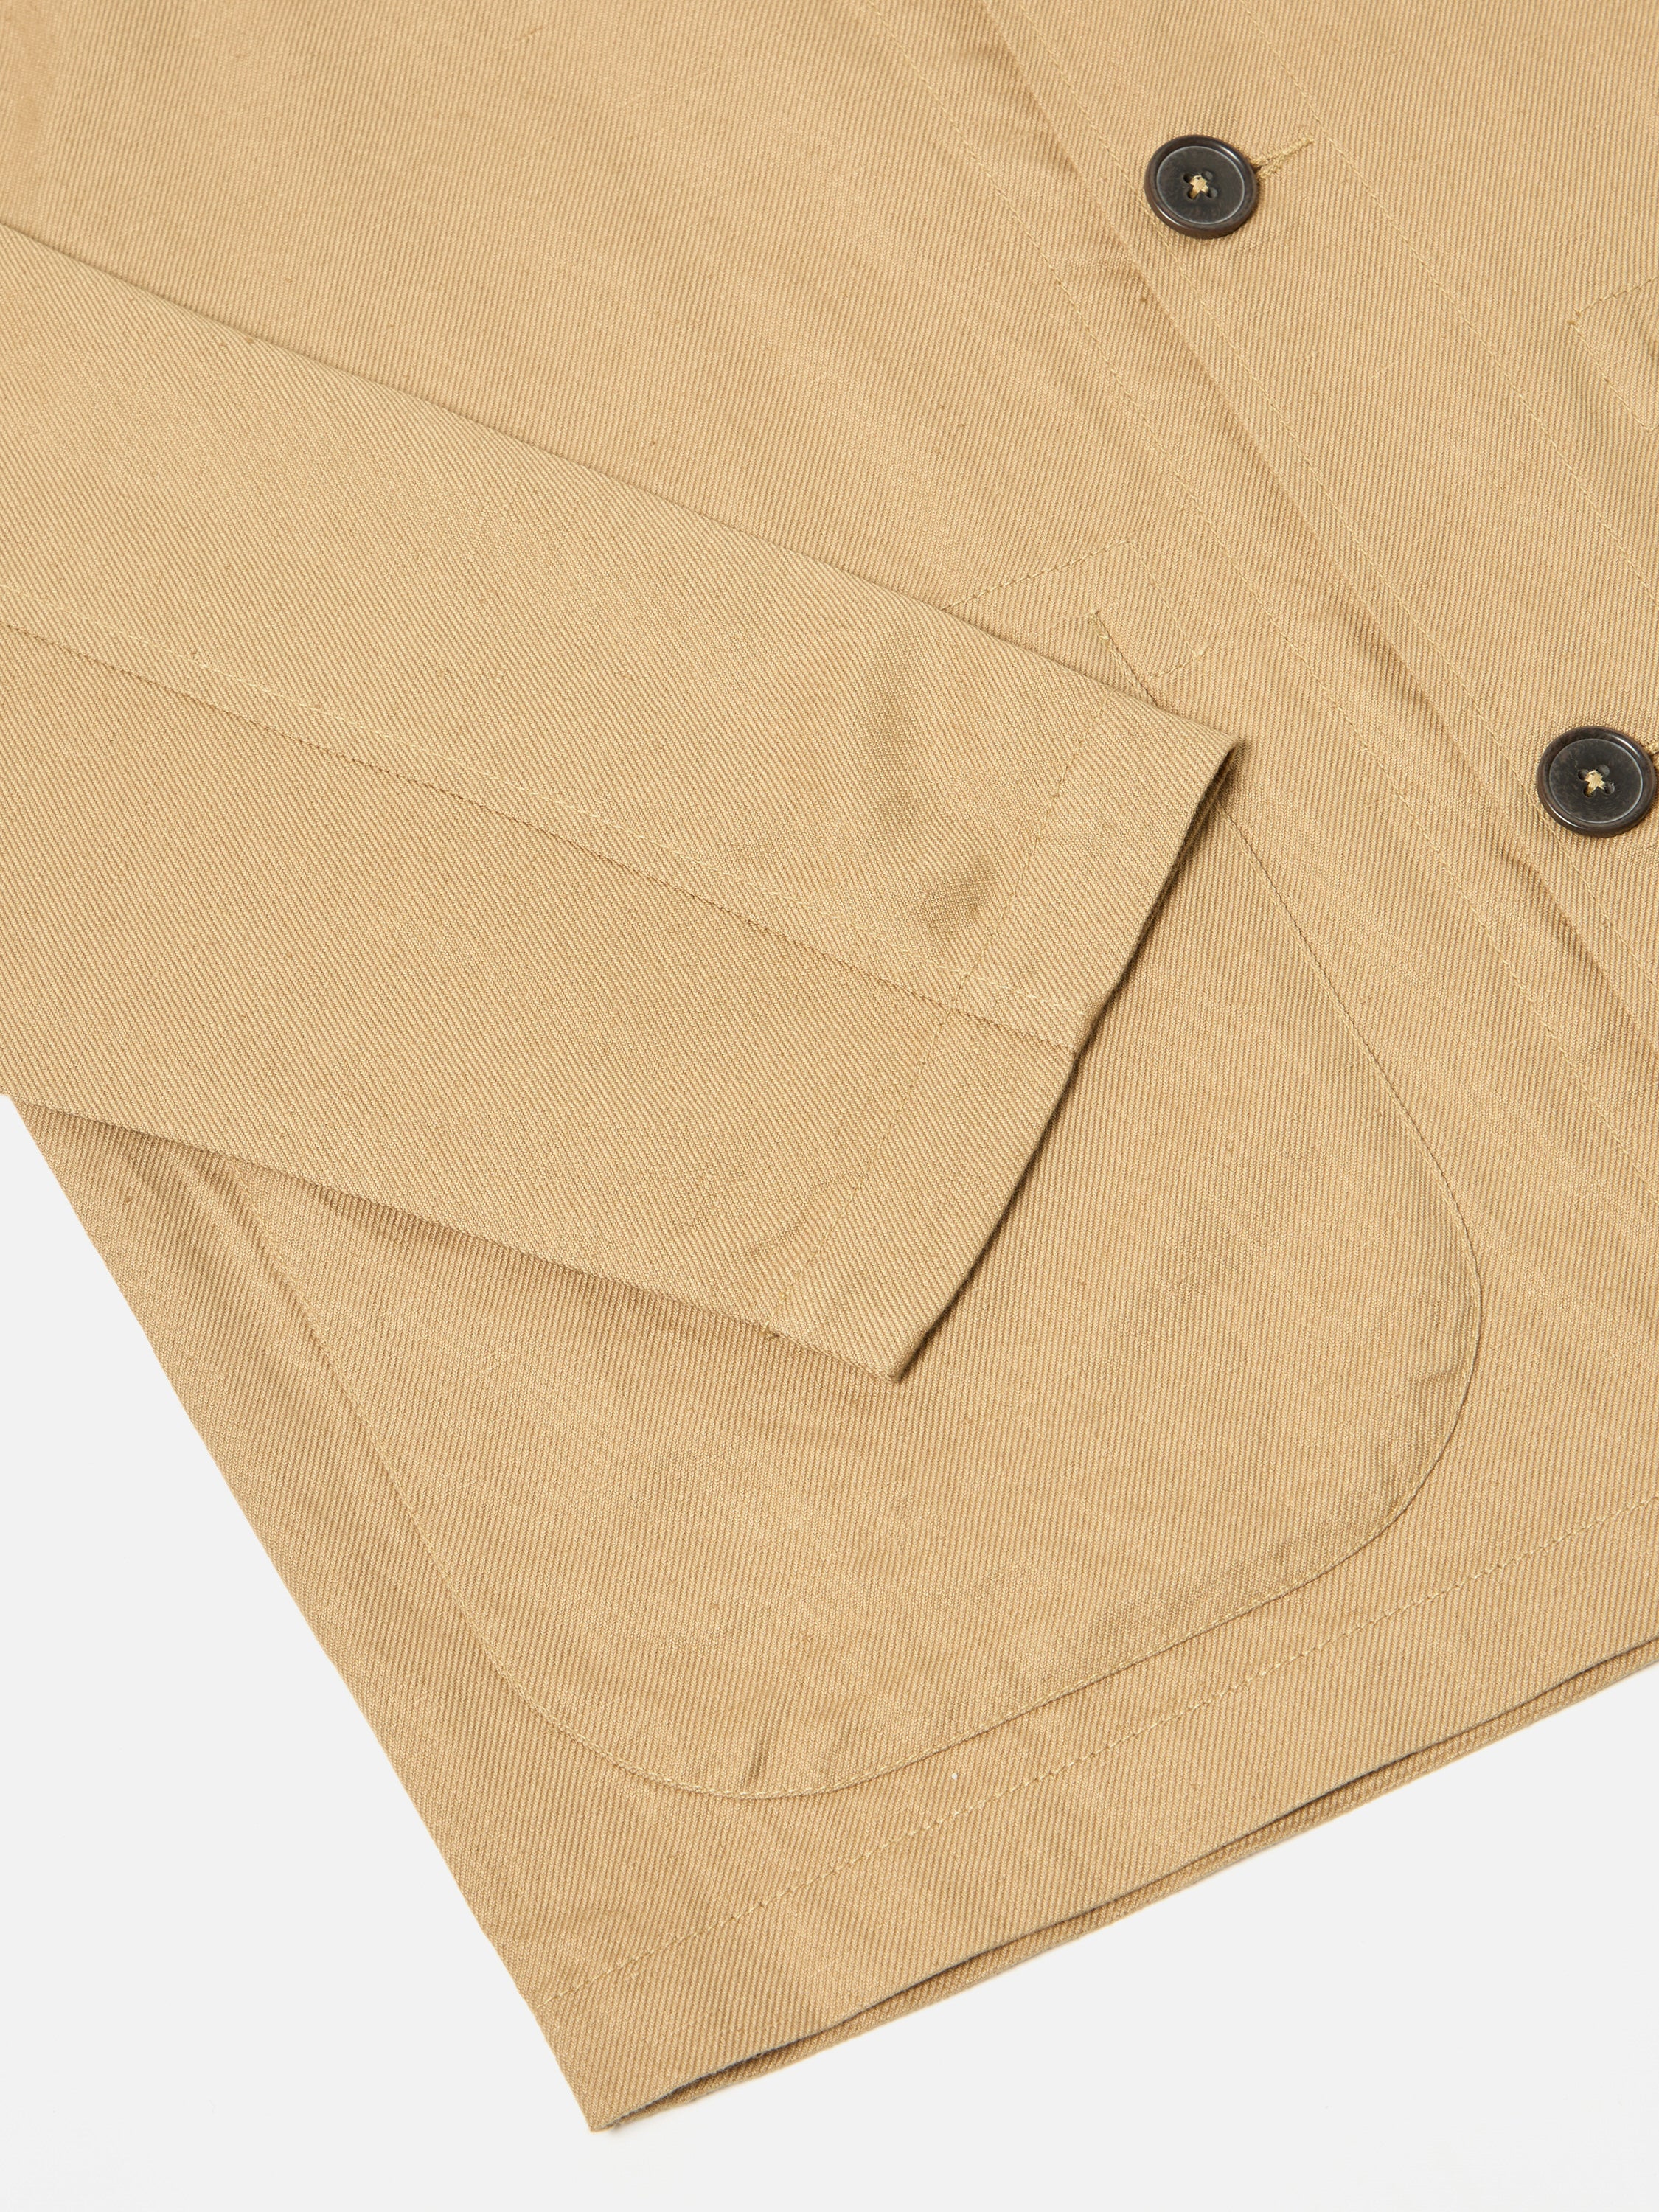 Universal Works Field Jacket in Sand Linen Cotton Suiting